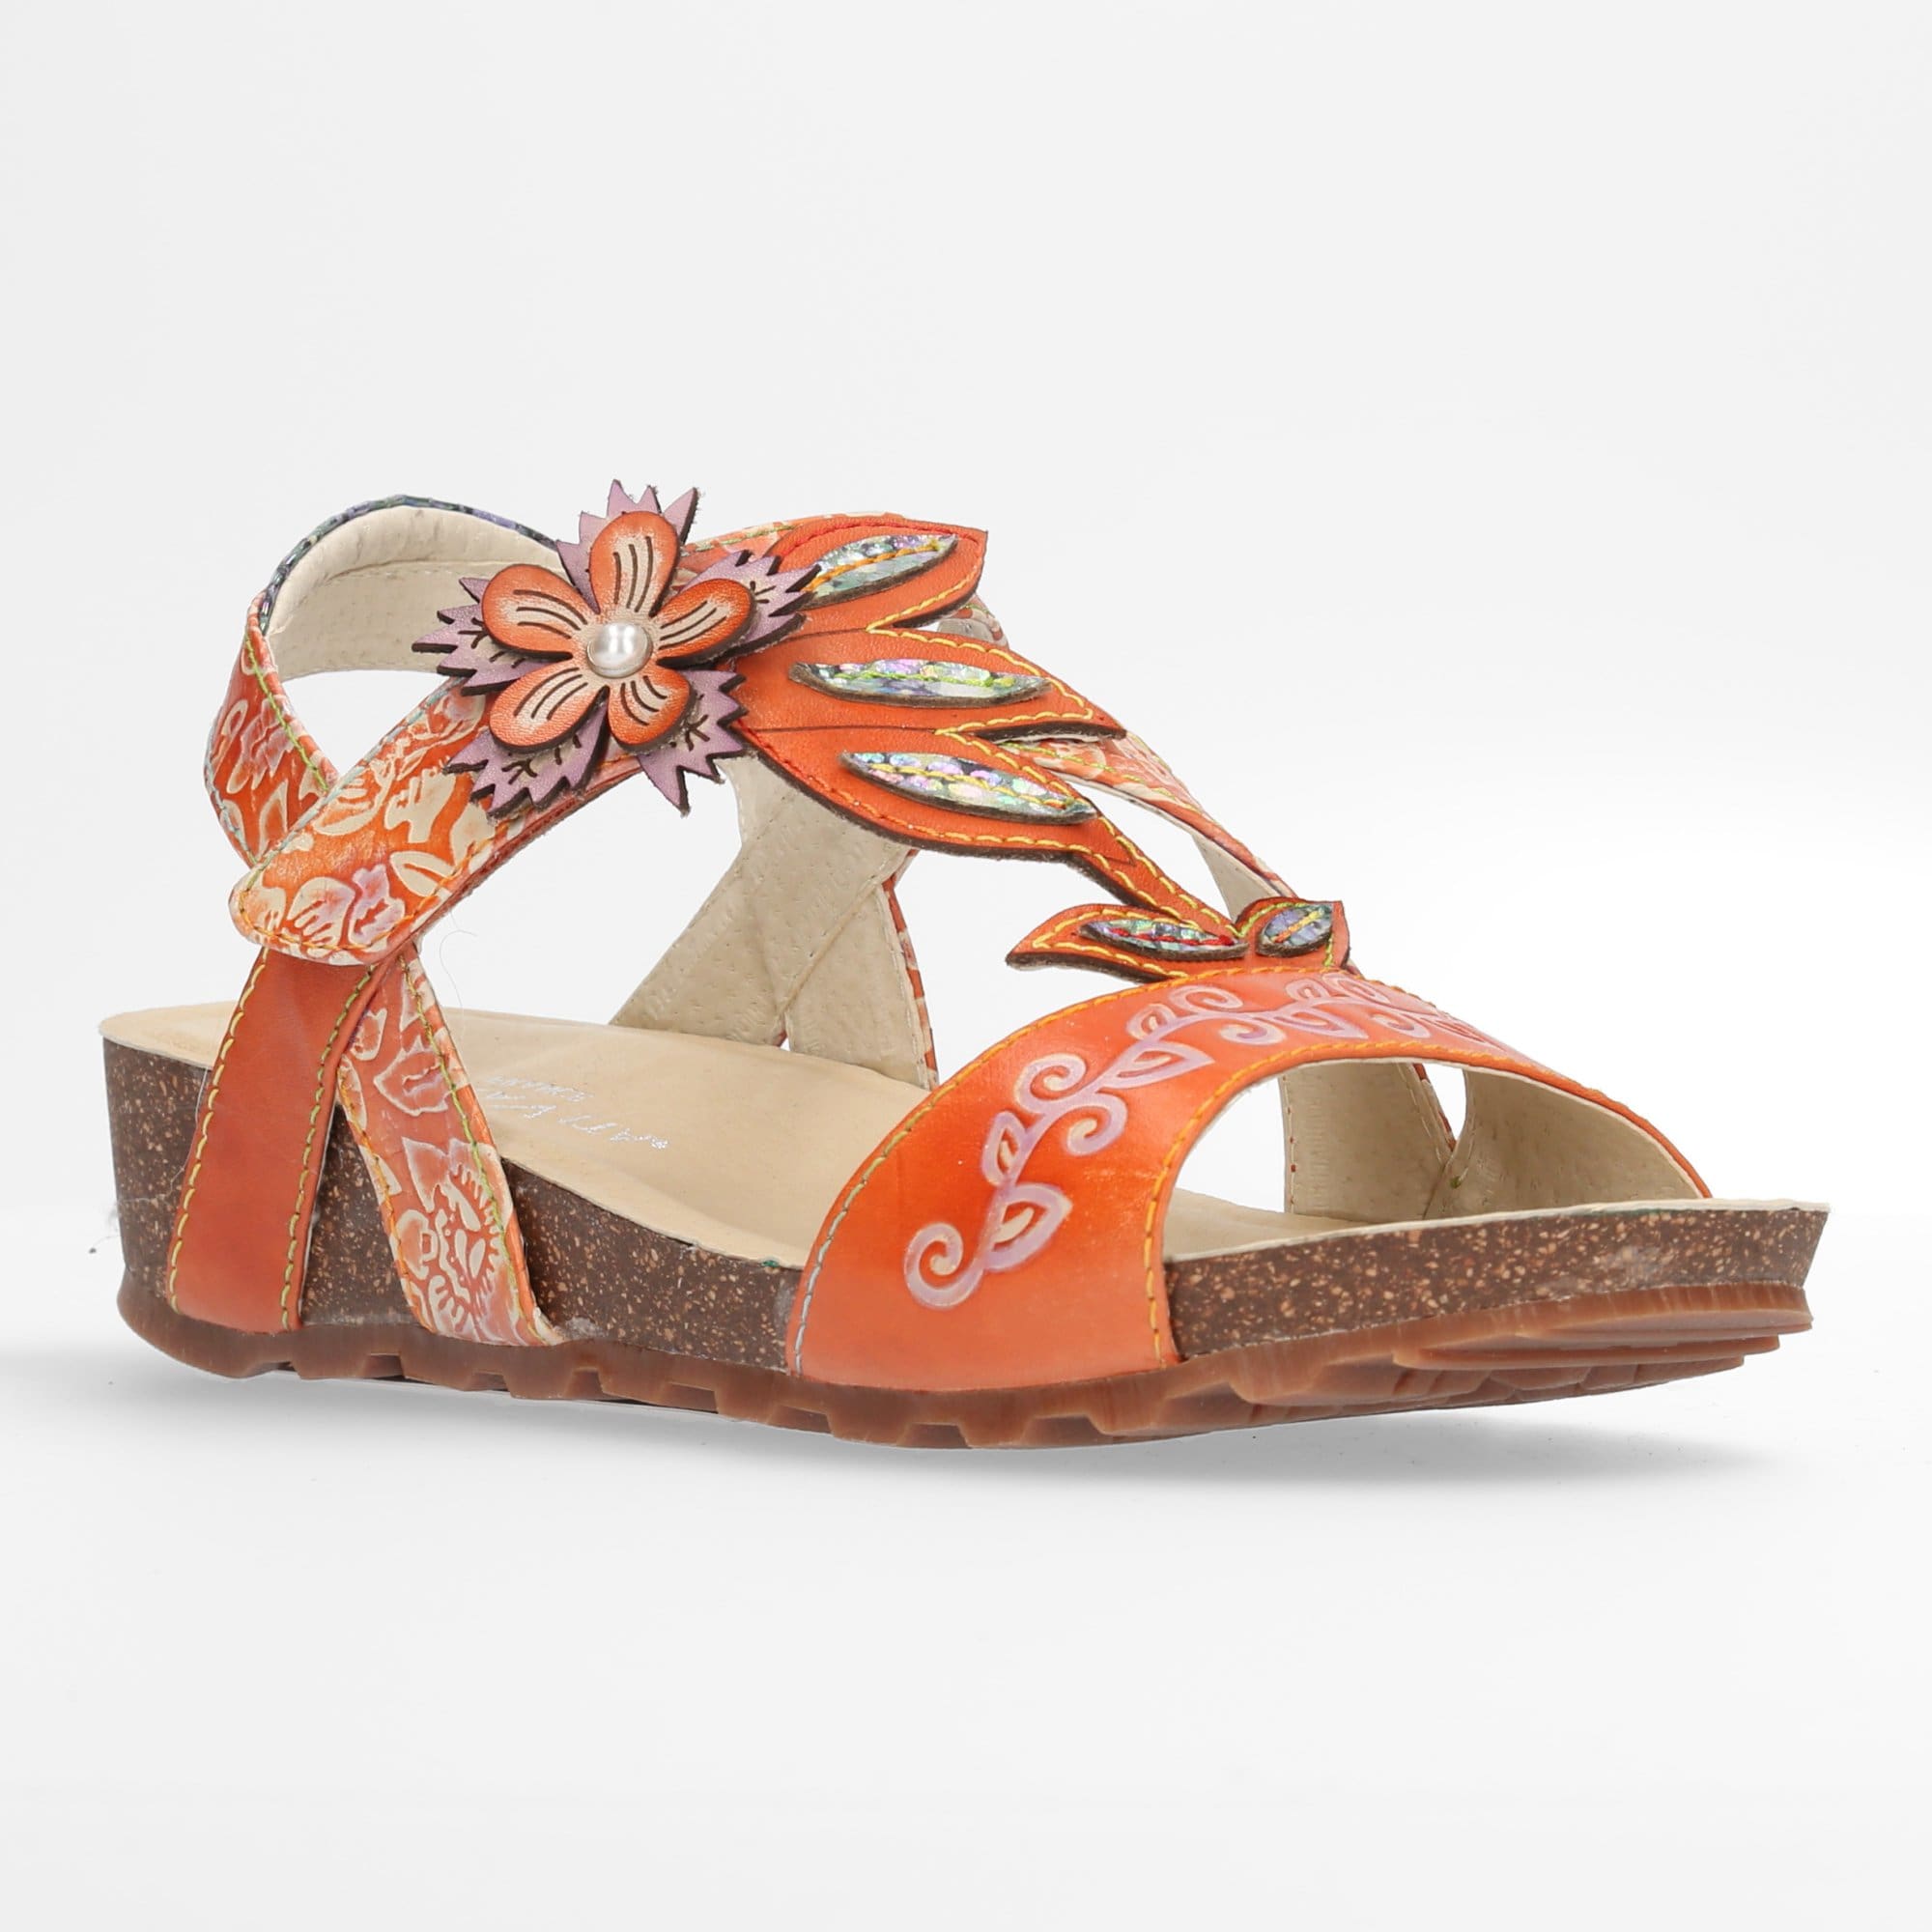 Chaussures BRCYANO 52 - Sandale